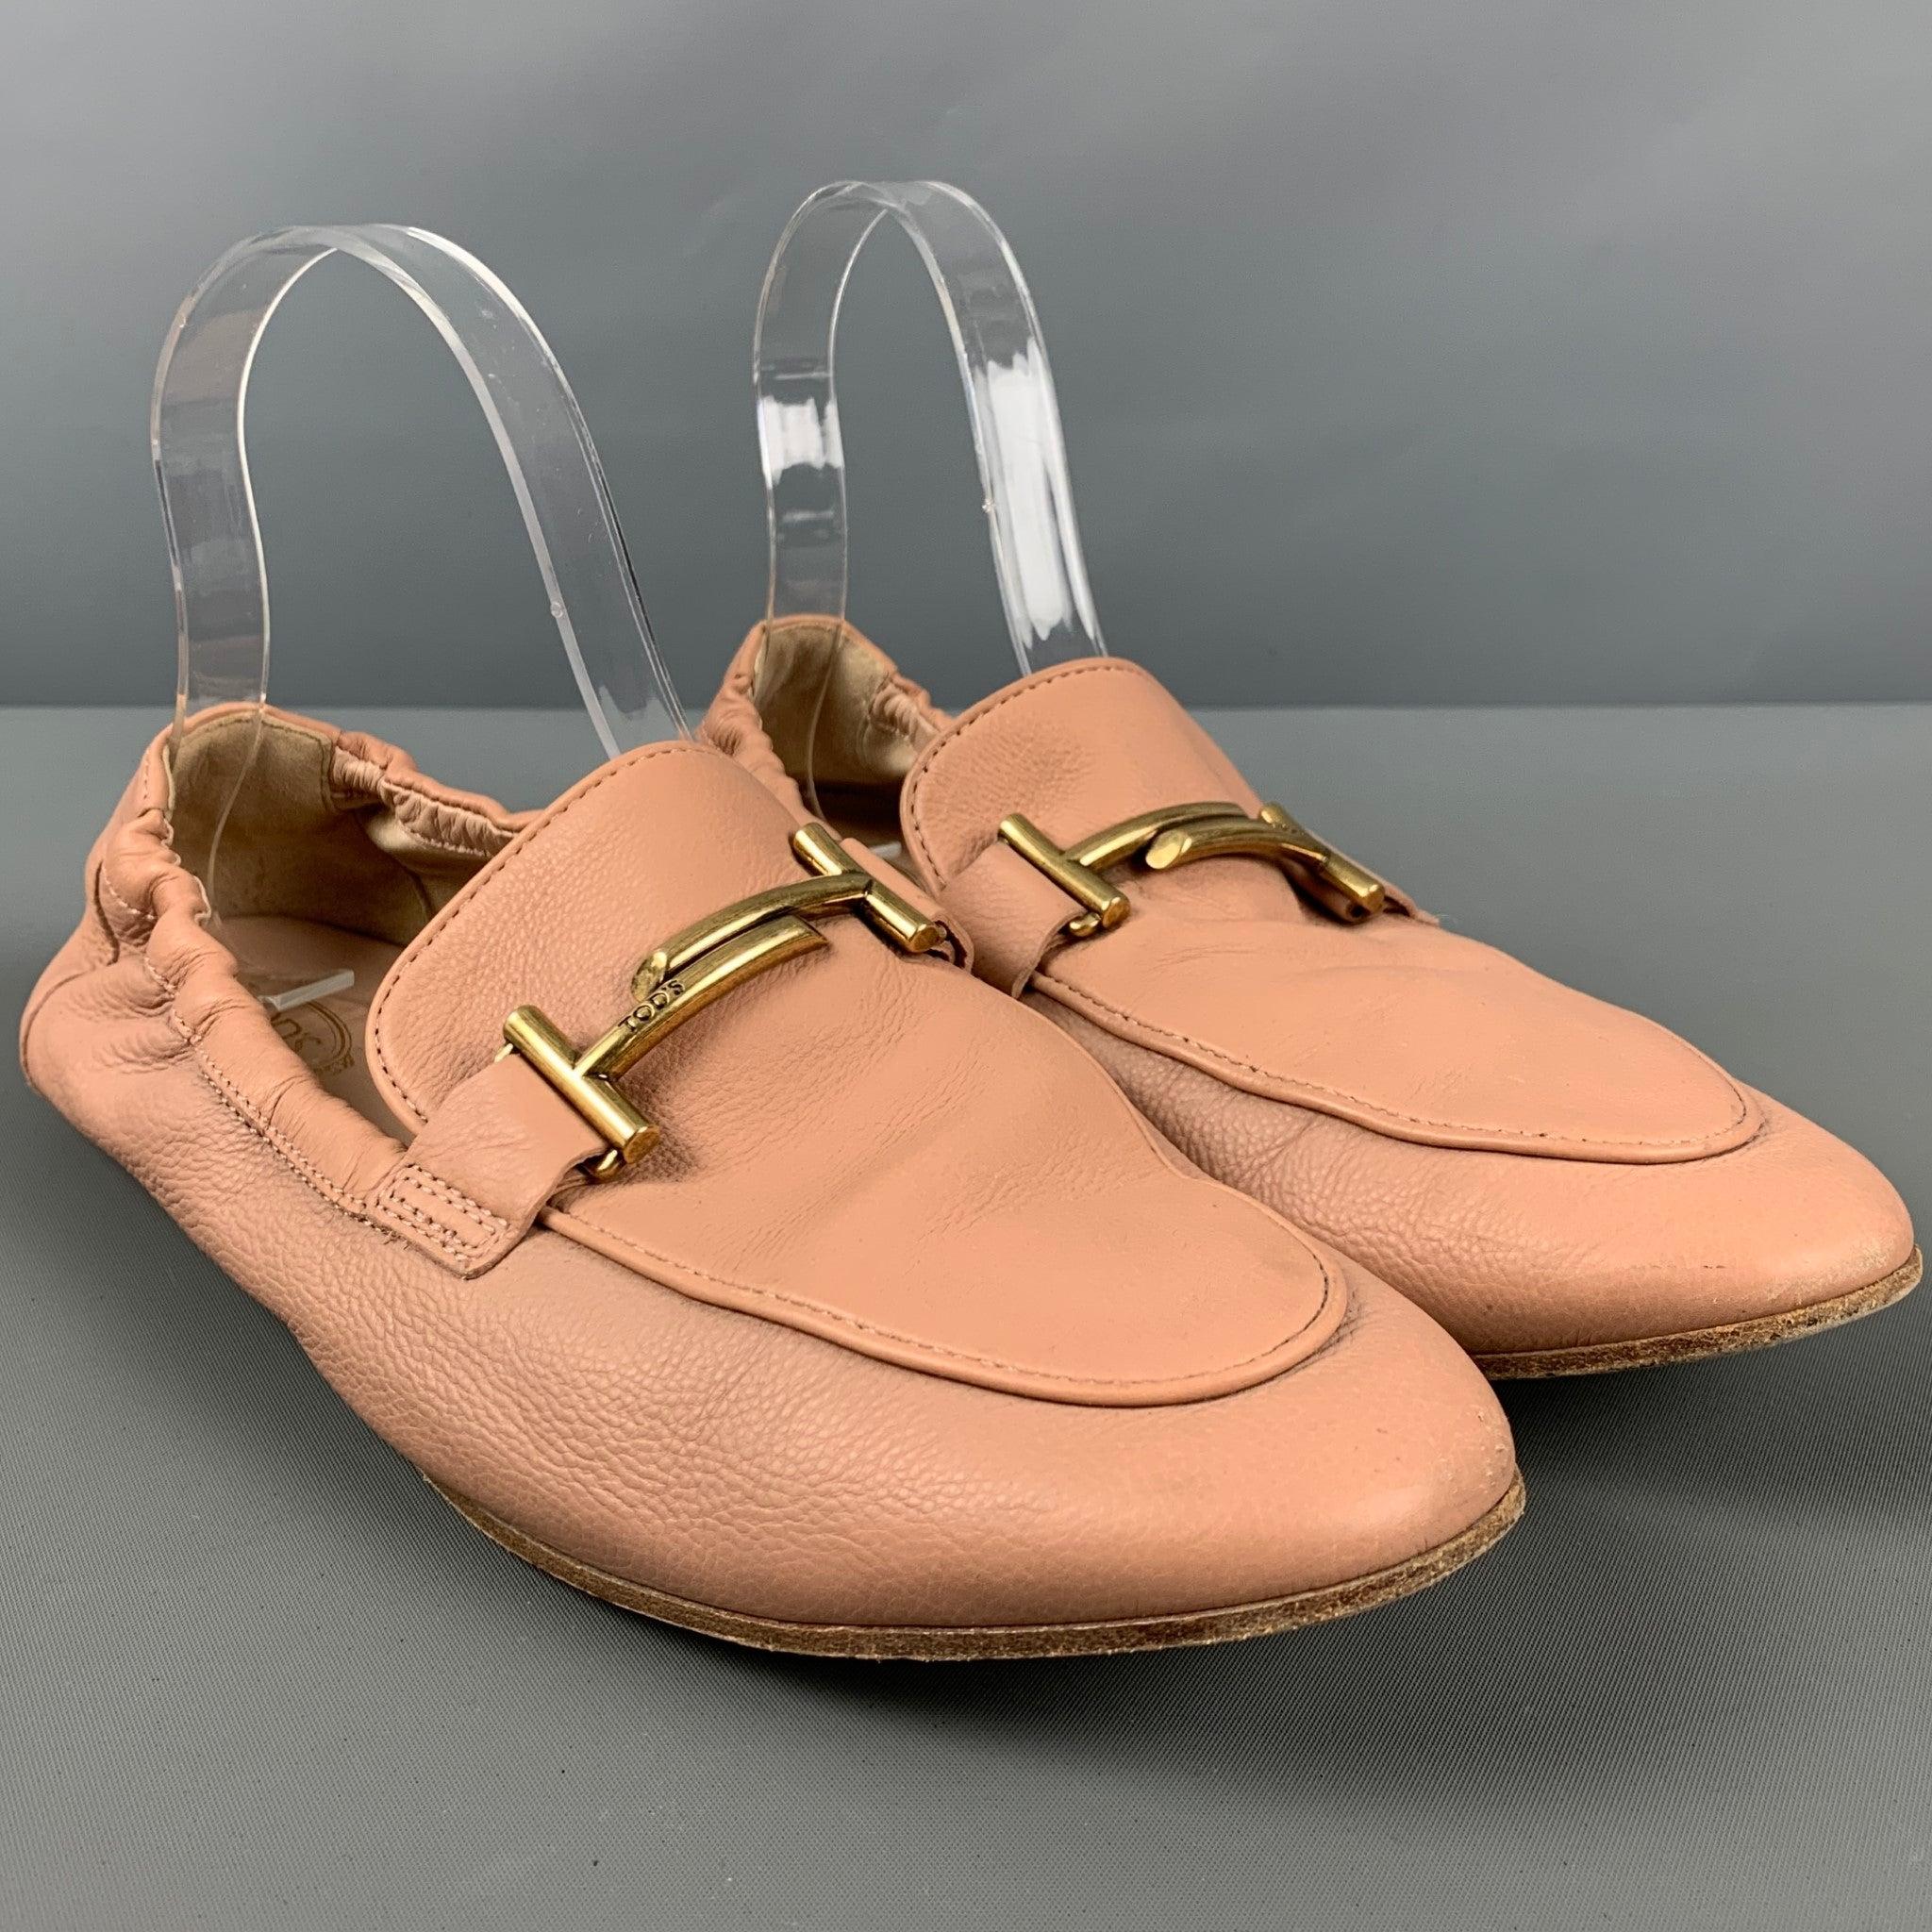 TOD'S flats
in a beige leather featuring a double T buckle detail, elastic slip on style, and wooden sole. Made in Italy.Very Good Pre-Owned Condition. 

Marked:   IT 41Outsole:11 inches  x 4 inches 
  
  
 
Reference: 126614
Category: Flats
More